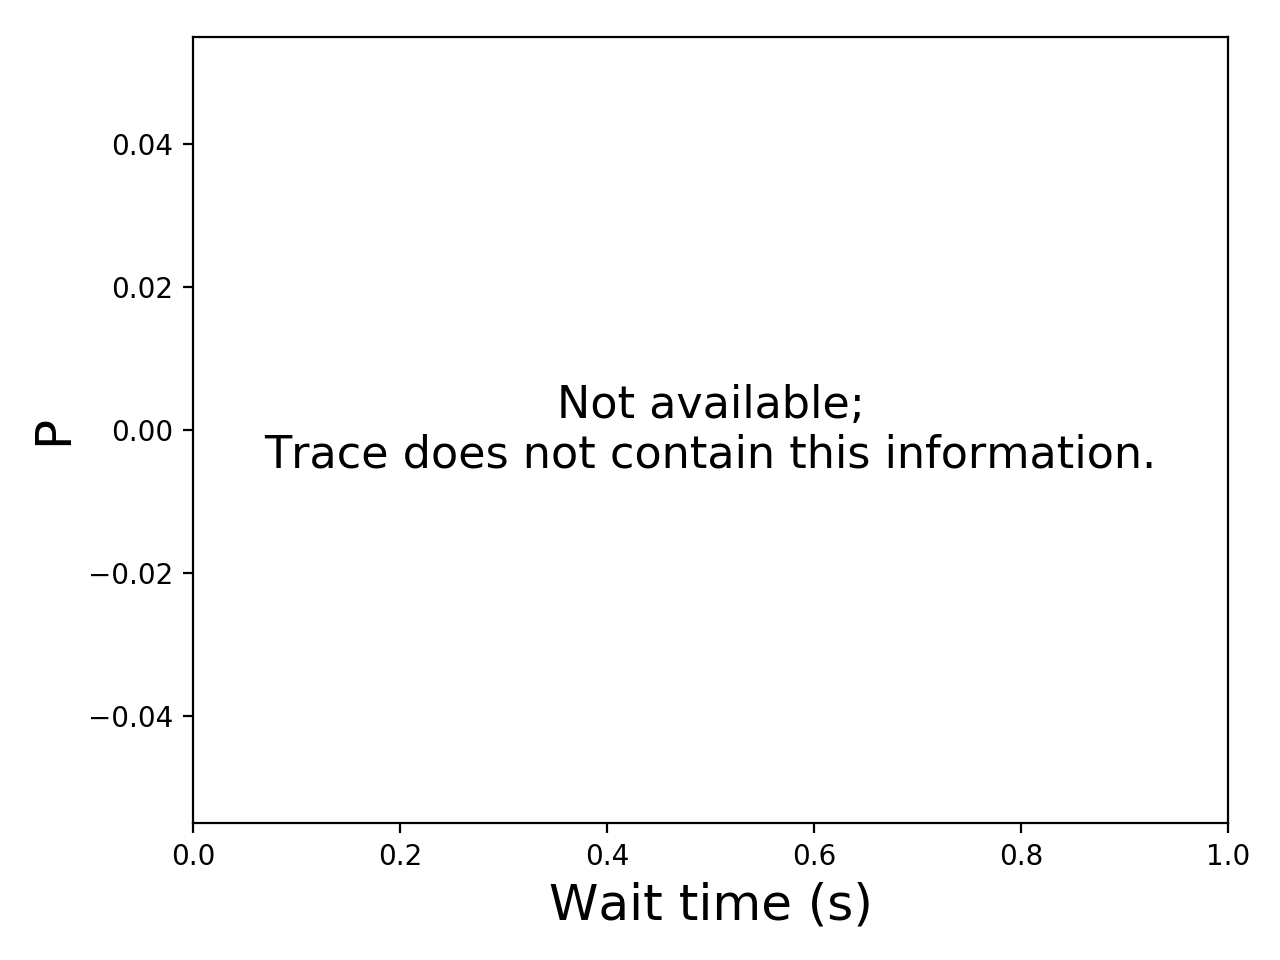 Task wait time CDF graph for the shell trace.